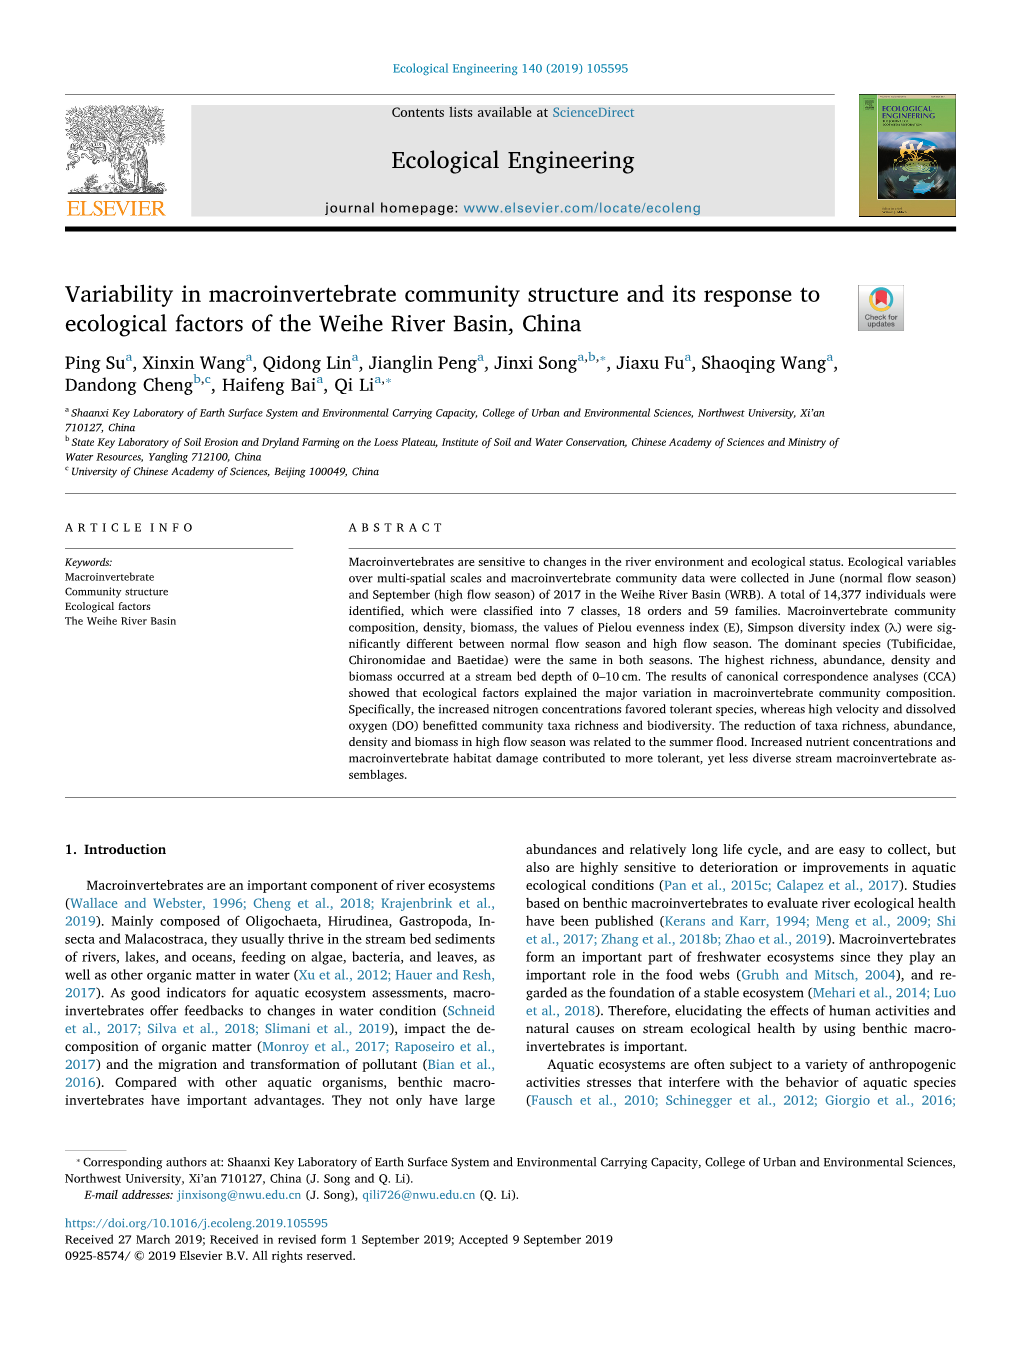 Variability in Macroinvertebrate Community Structure and Its